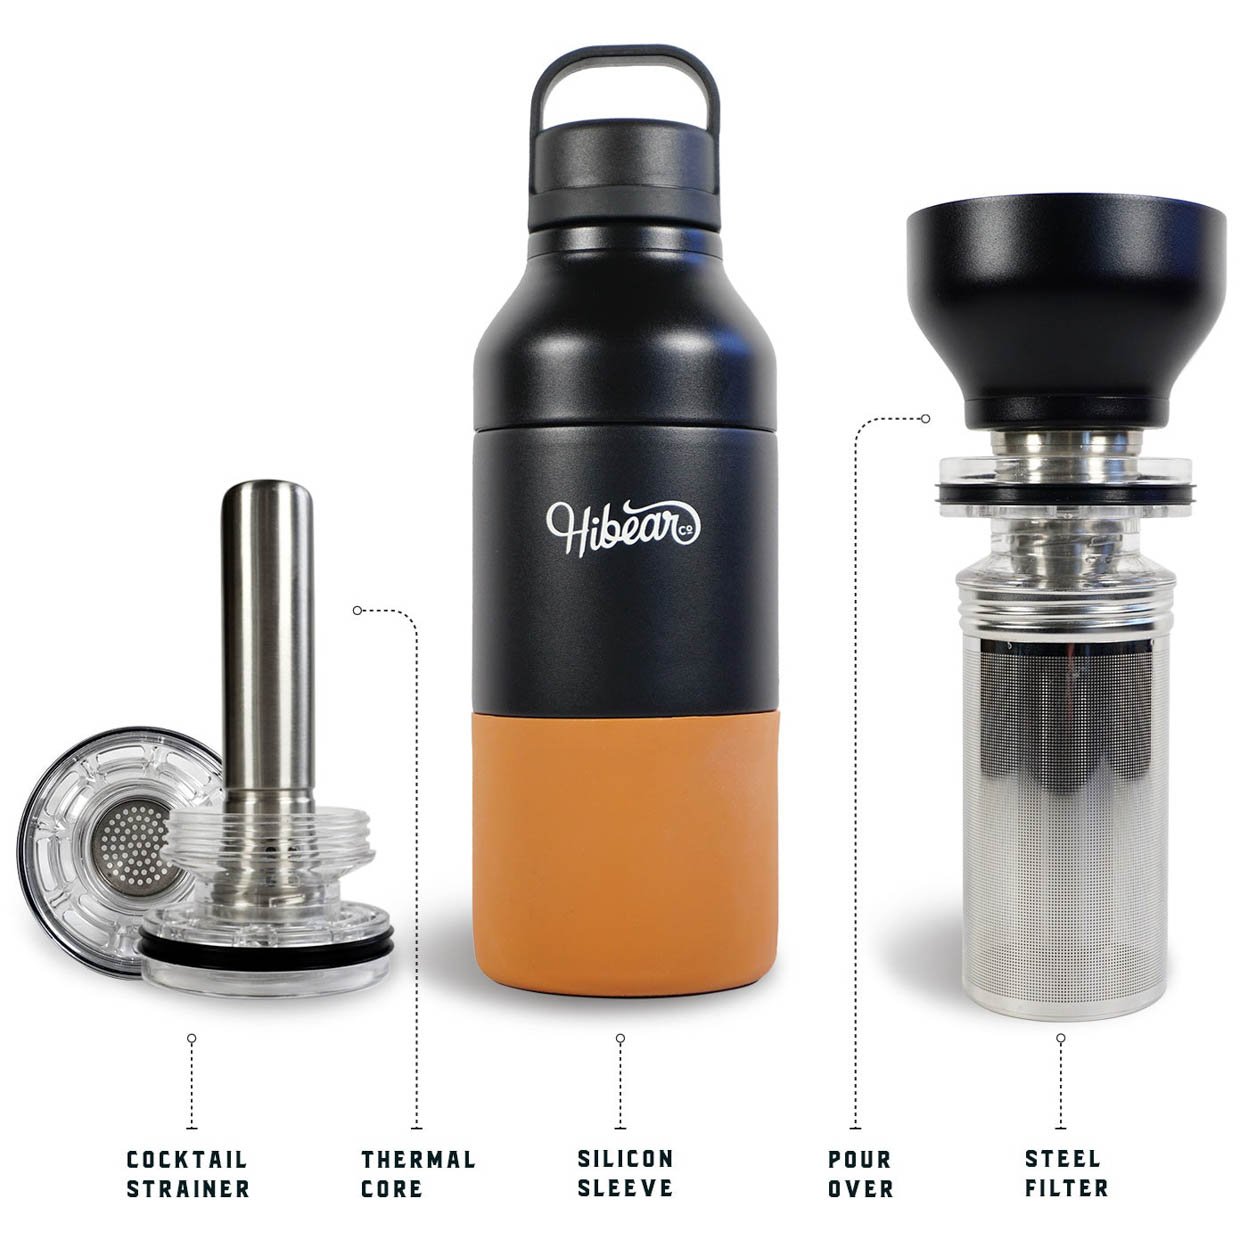 All-Day Adventure Flask